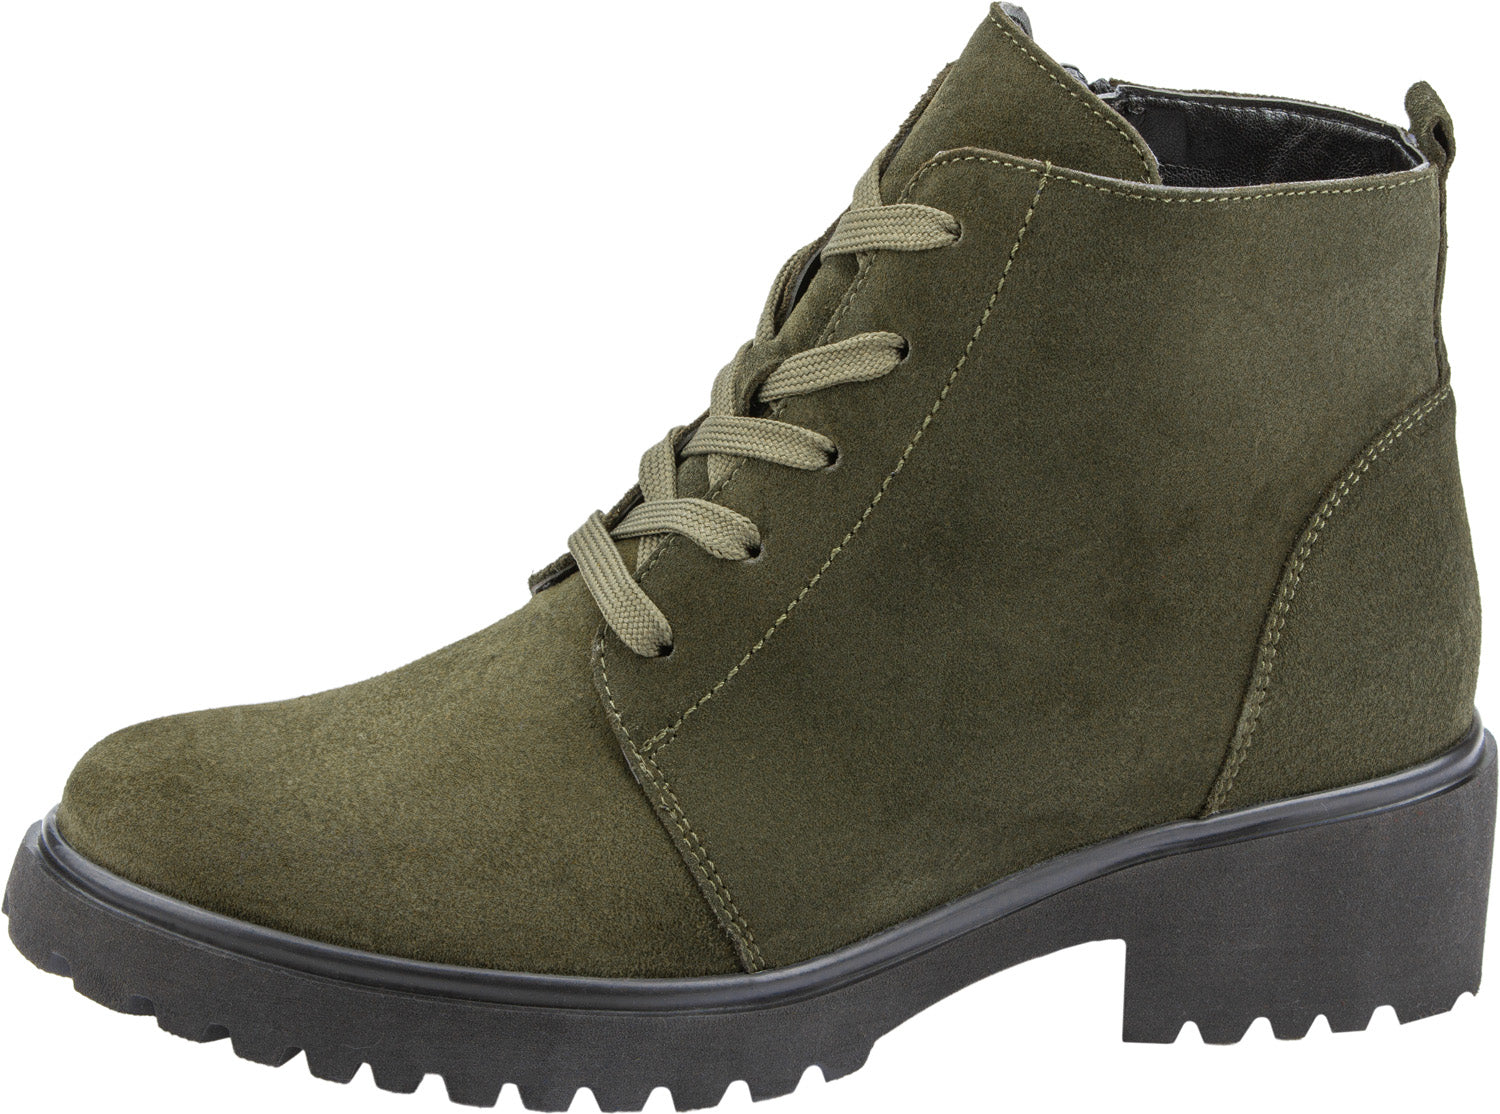 Waldlaufer 716807 195 066 H-Luise Ladies Wider Fitting Green Suede Lace Up Ankle Boot